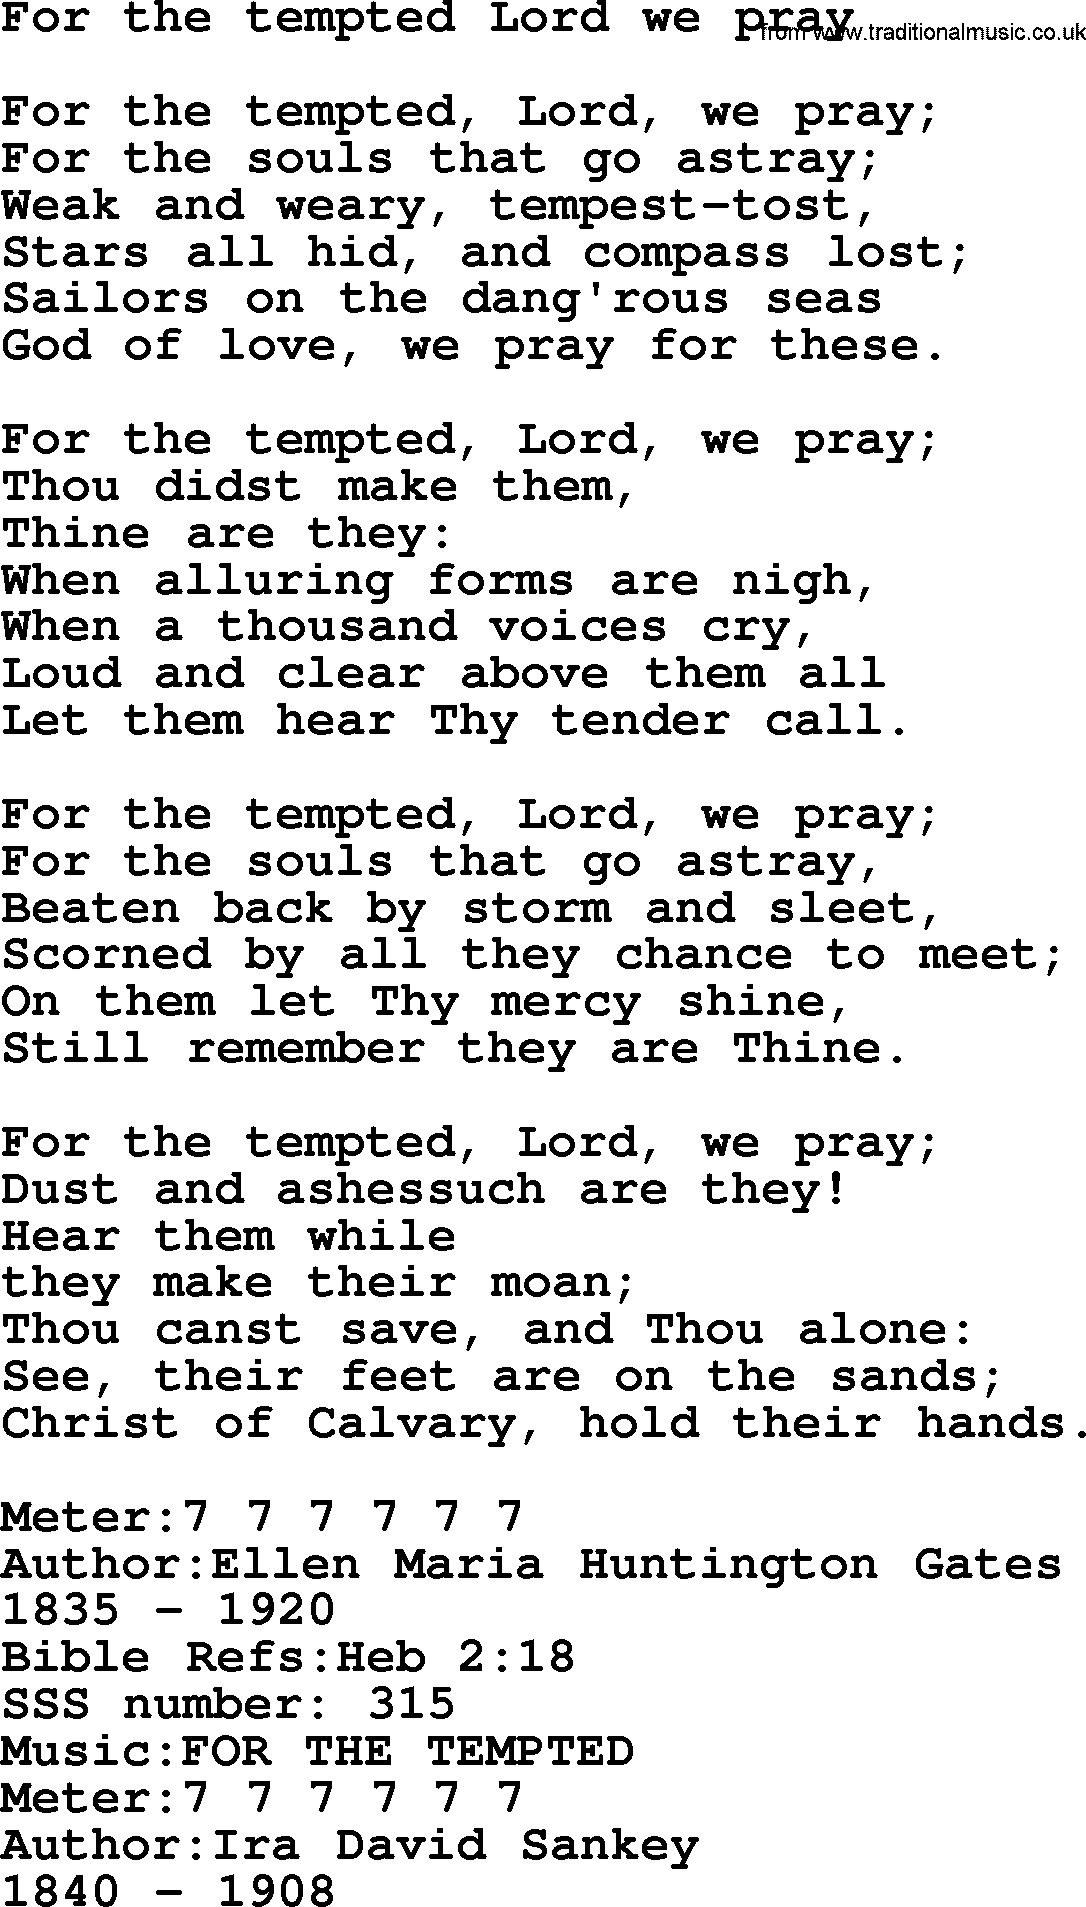 Sacred Songs and Solos complete, 1200 Hymns, title: For The Tempted Lord We Pray, lyrics and PDF